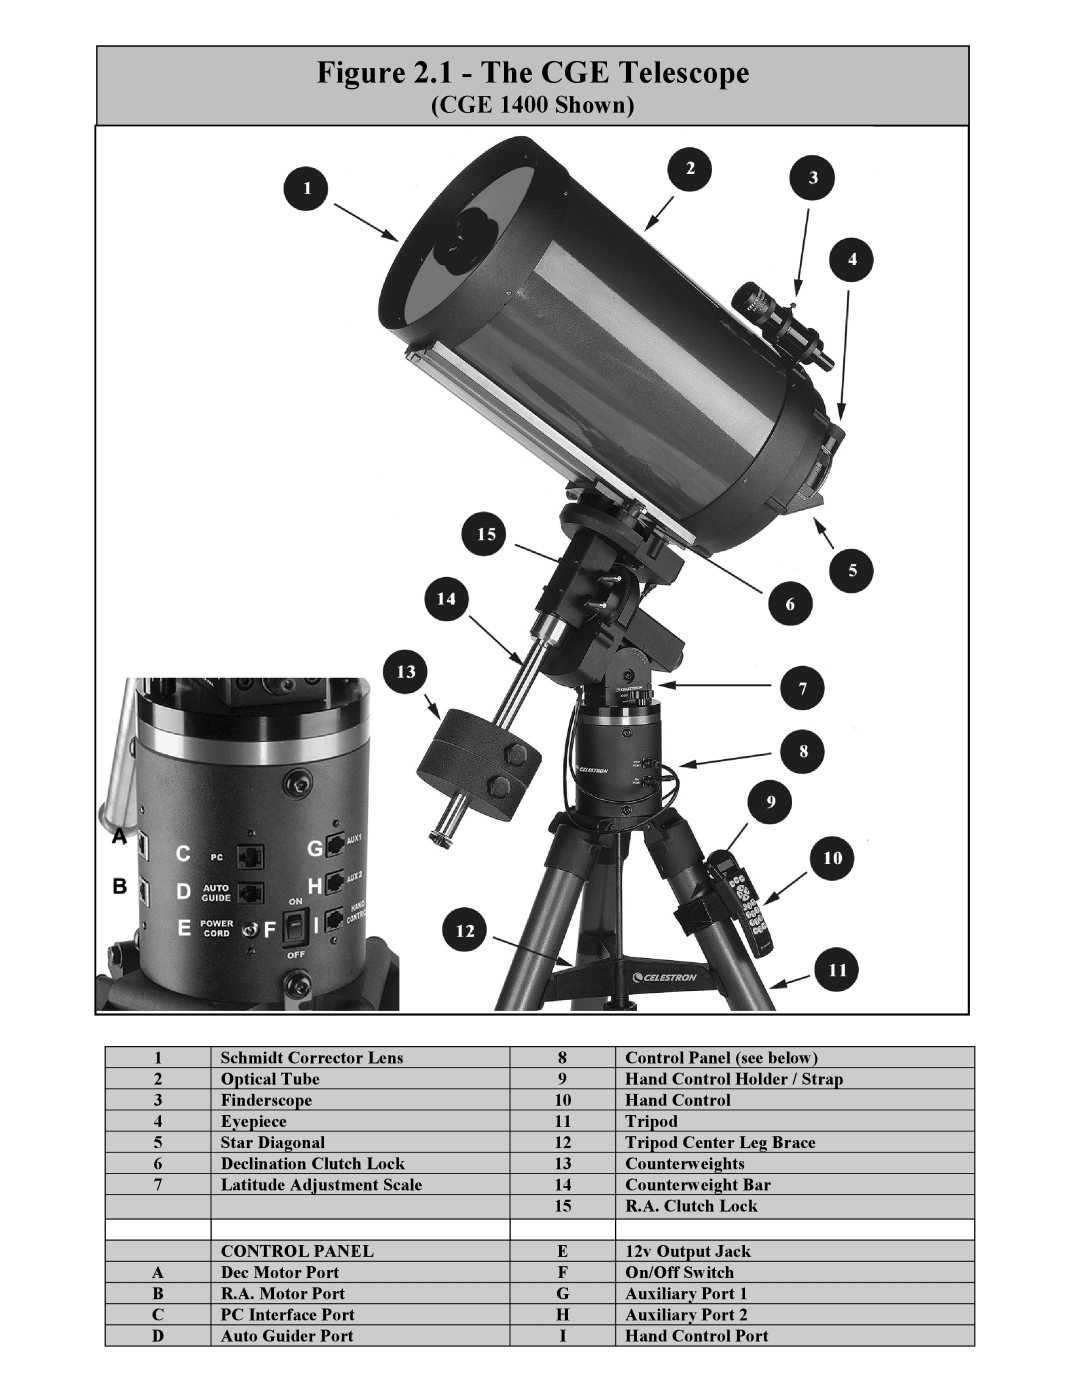 Celestron CGE1100 1 - The CGE Telescope, CGE 1400 Shown, Schmidt Corrector Lens, Control Panel see below, Optical Tube 